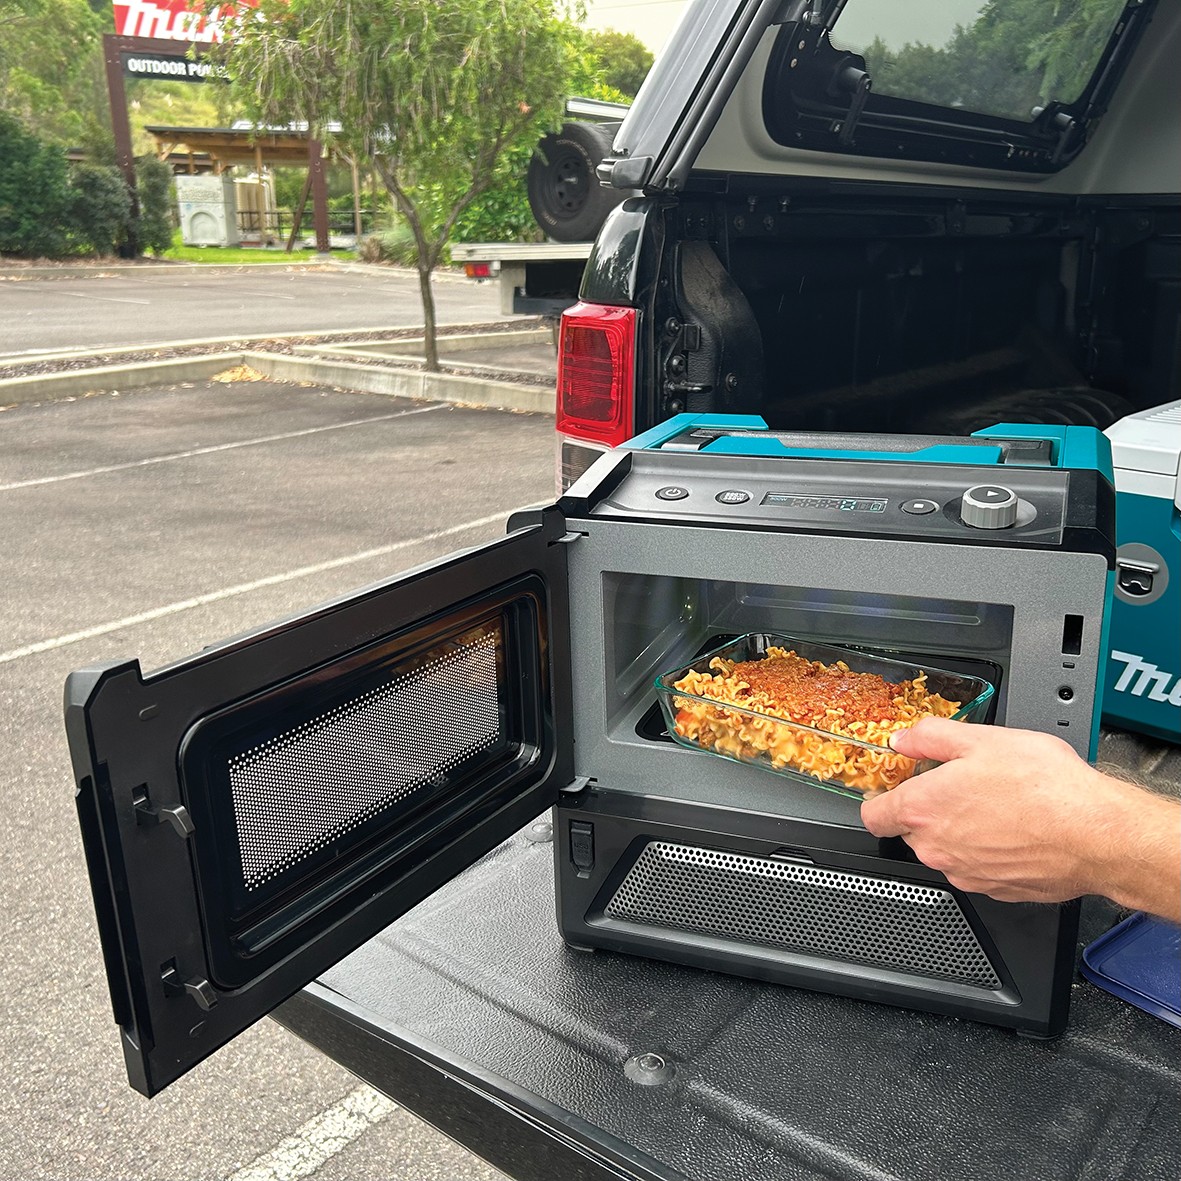 Makita Portable Microwave: The Tradies' New Best Friend